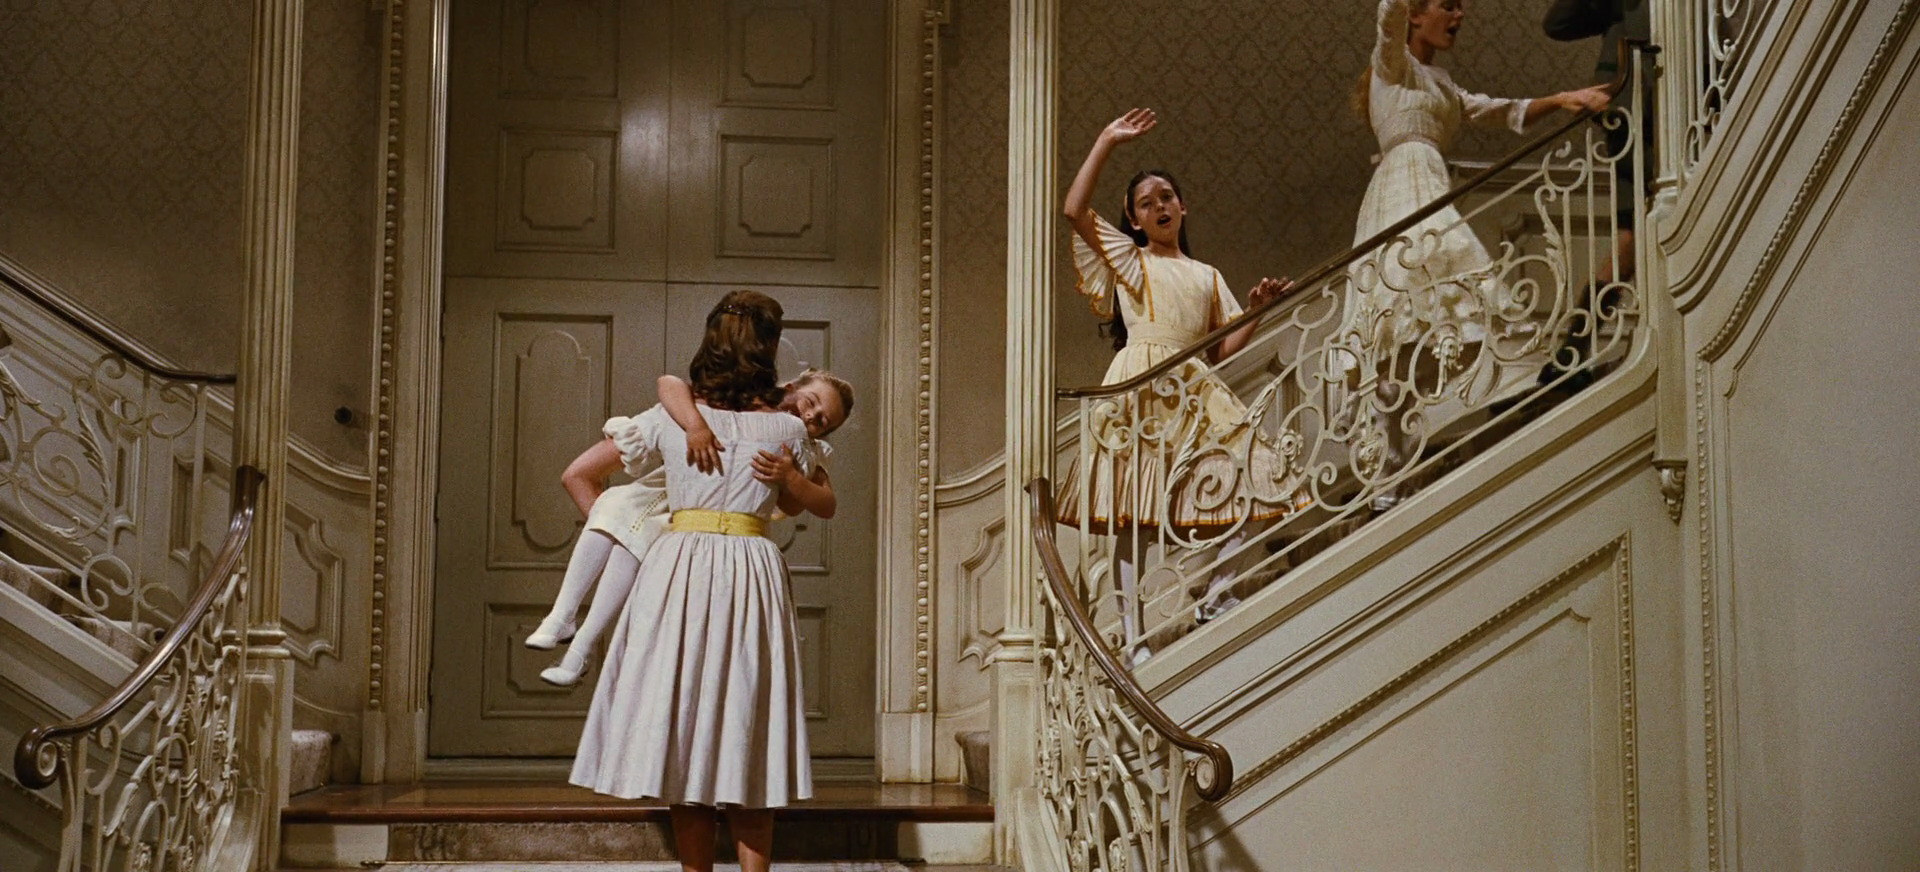 in the sound of music the kids are heading upstairs